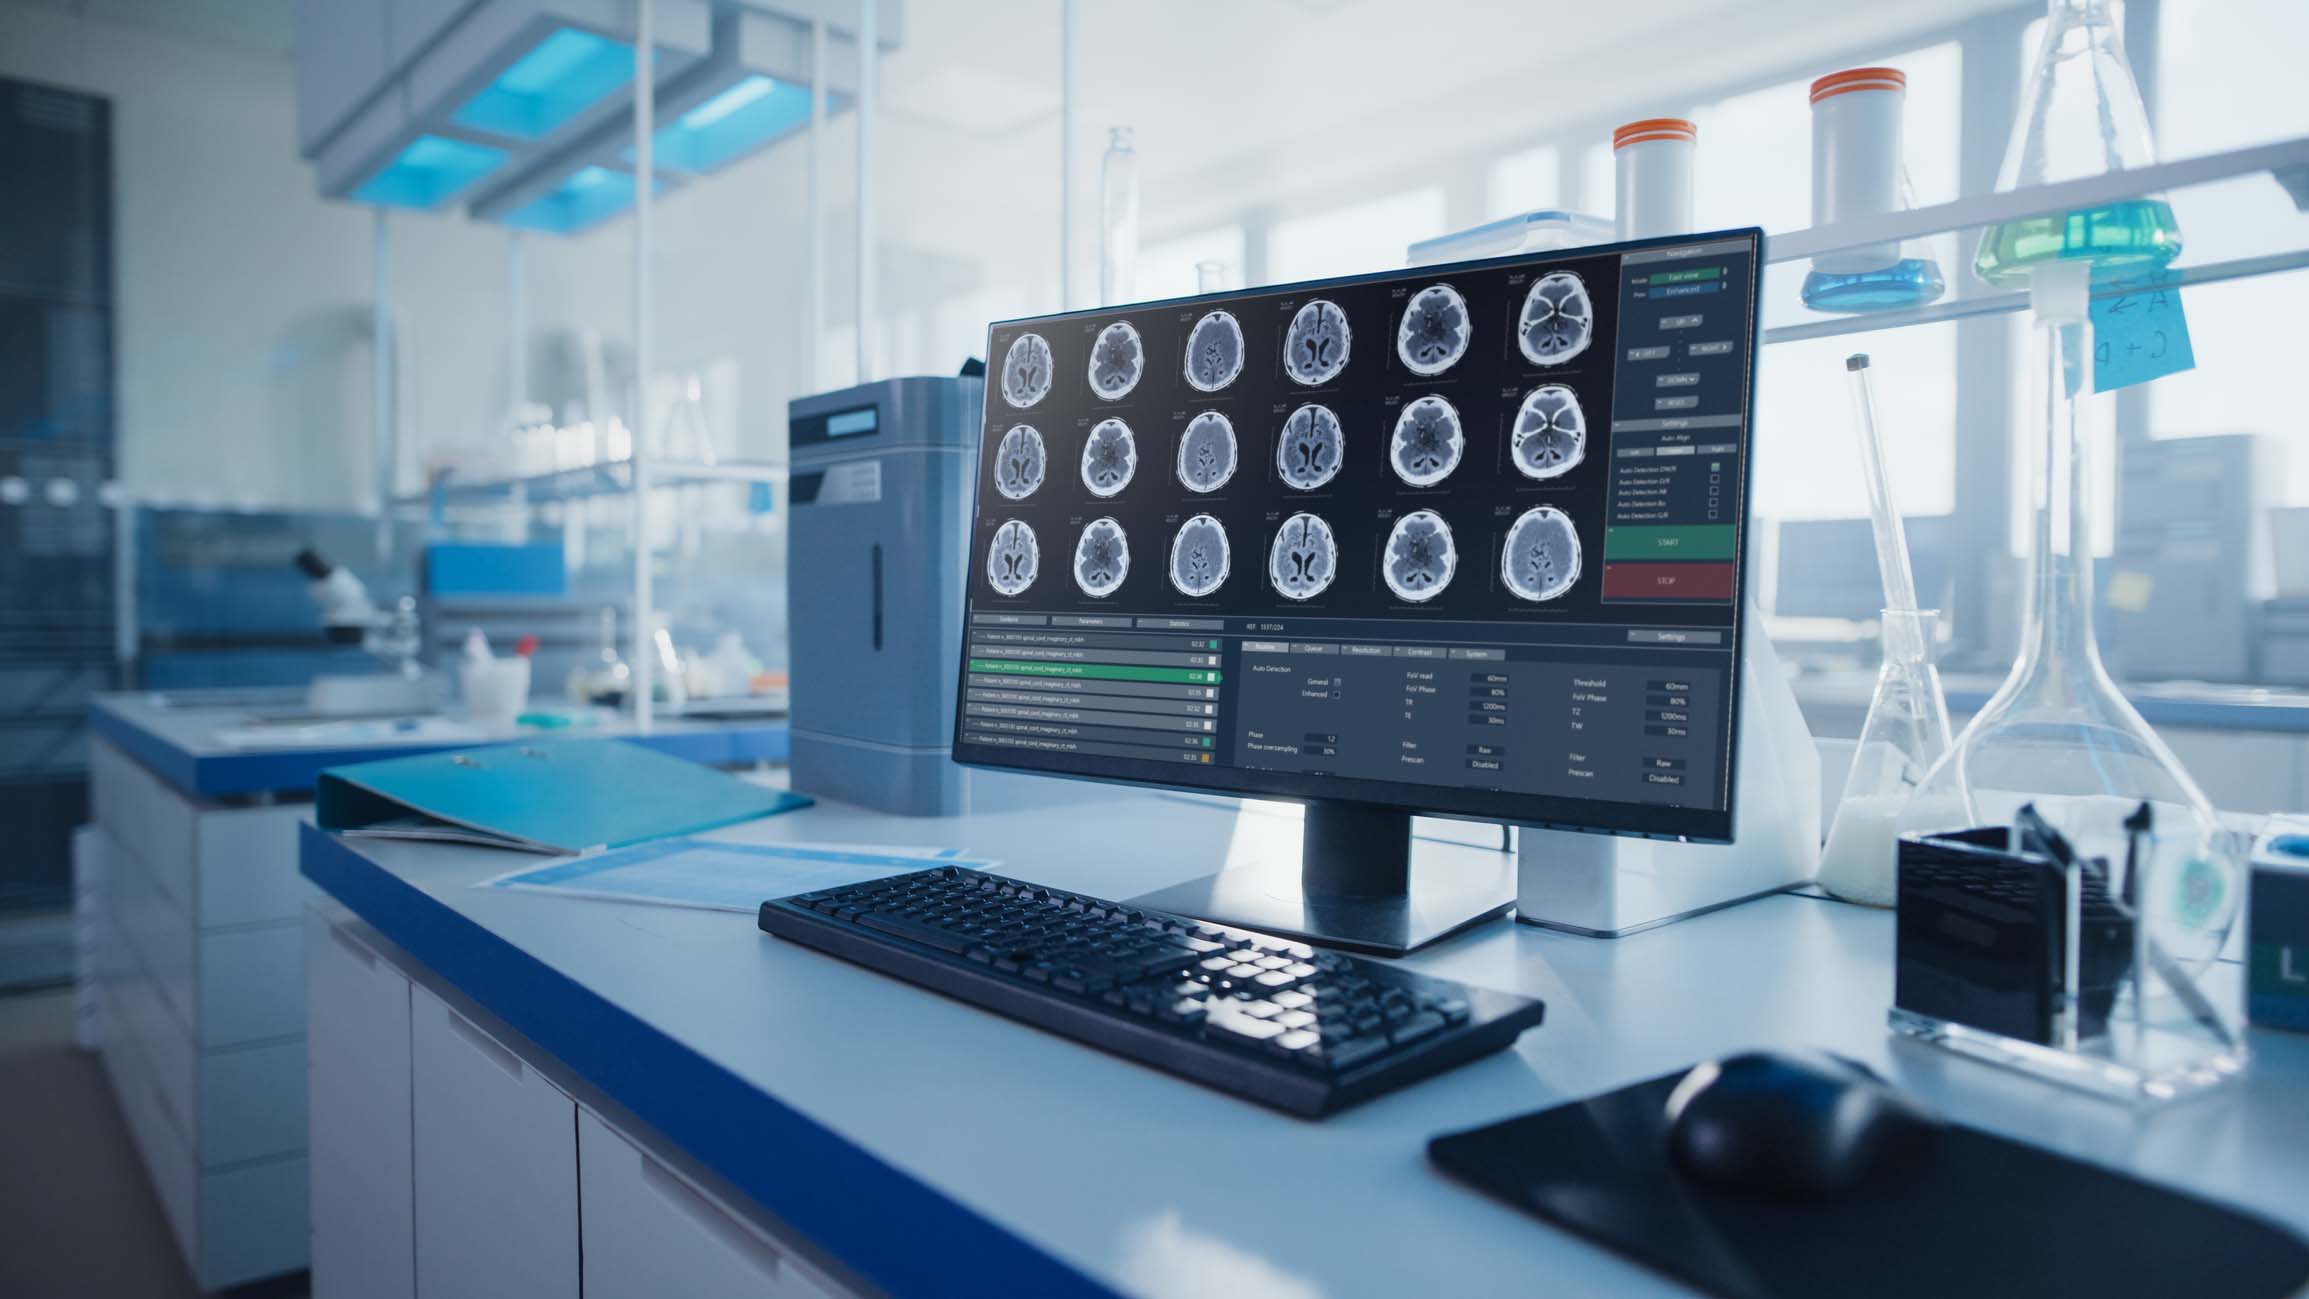 Modern Medical Research Laboratory with Computer Showing MRI Brain Scans. Glassware with Biochemicals on the Desk. Scientific Lab Biotechnology Development Center Full of High-Tech Equipment.